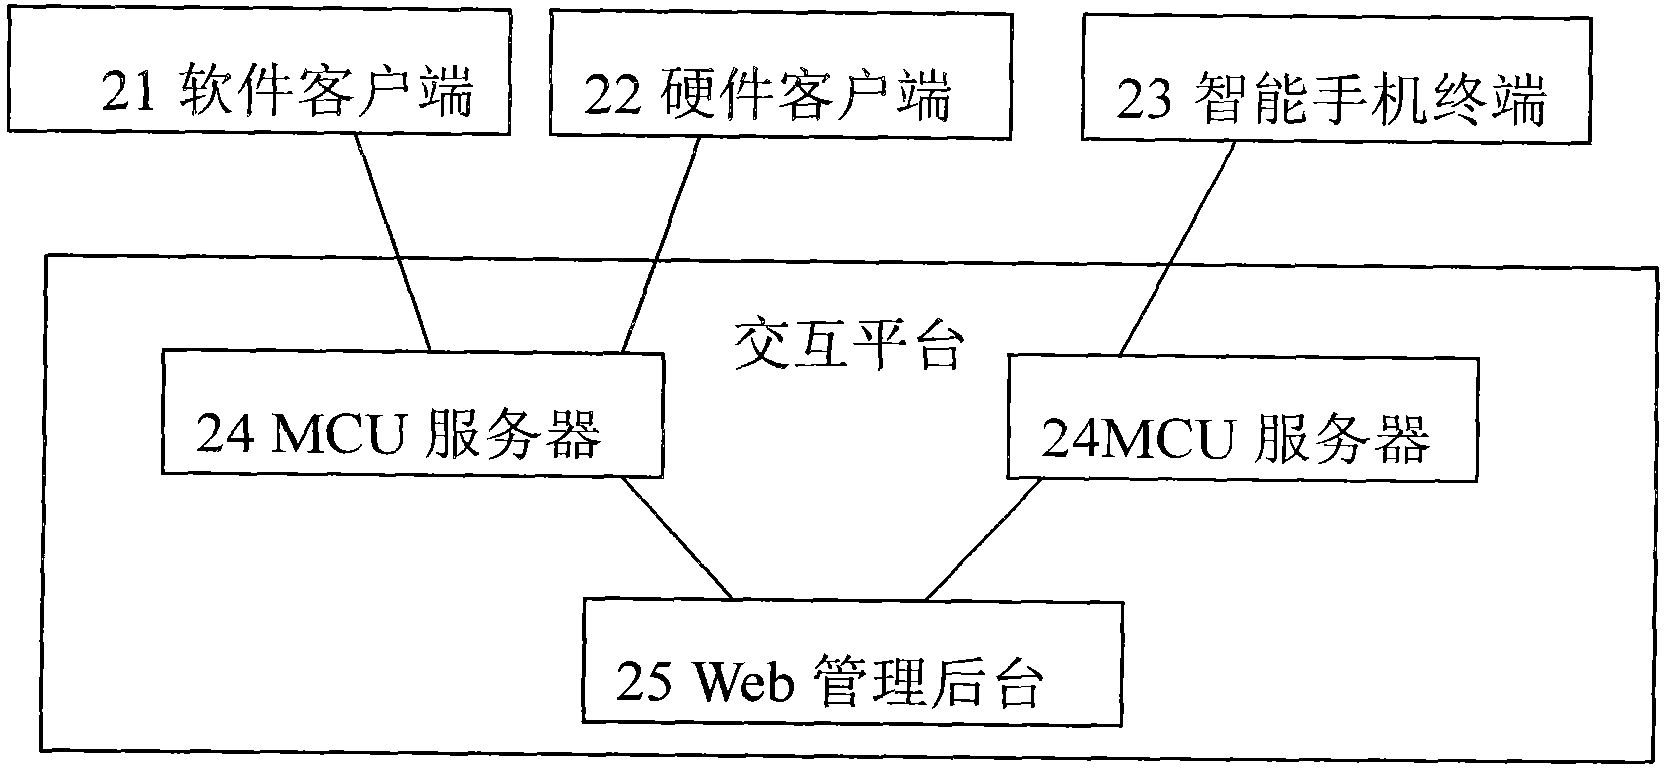 Real-time information safety service method and system for supporting dynamic interaction